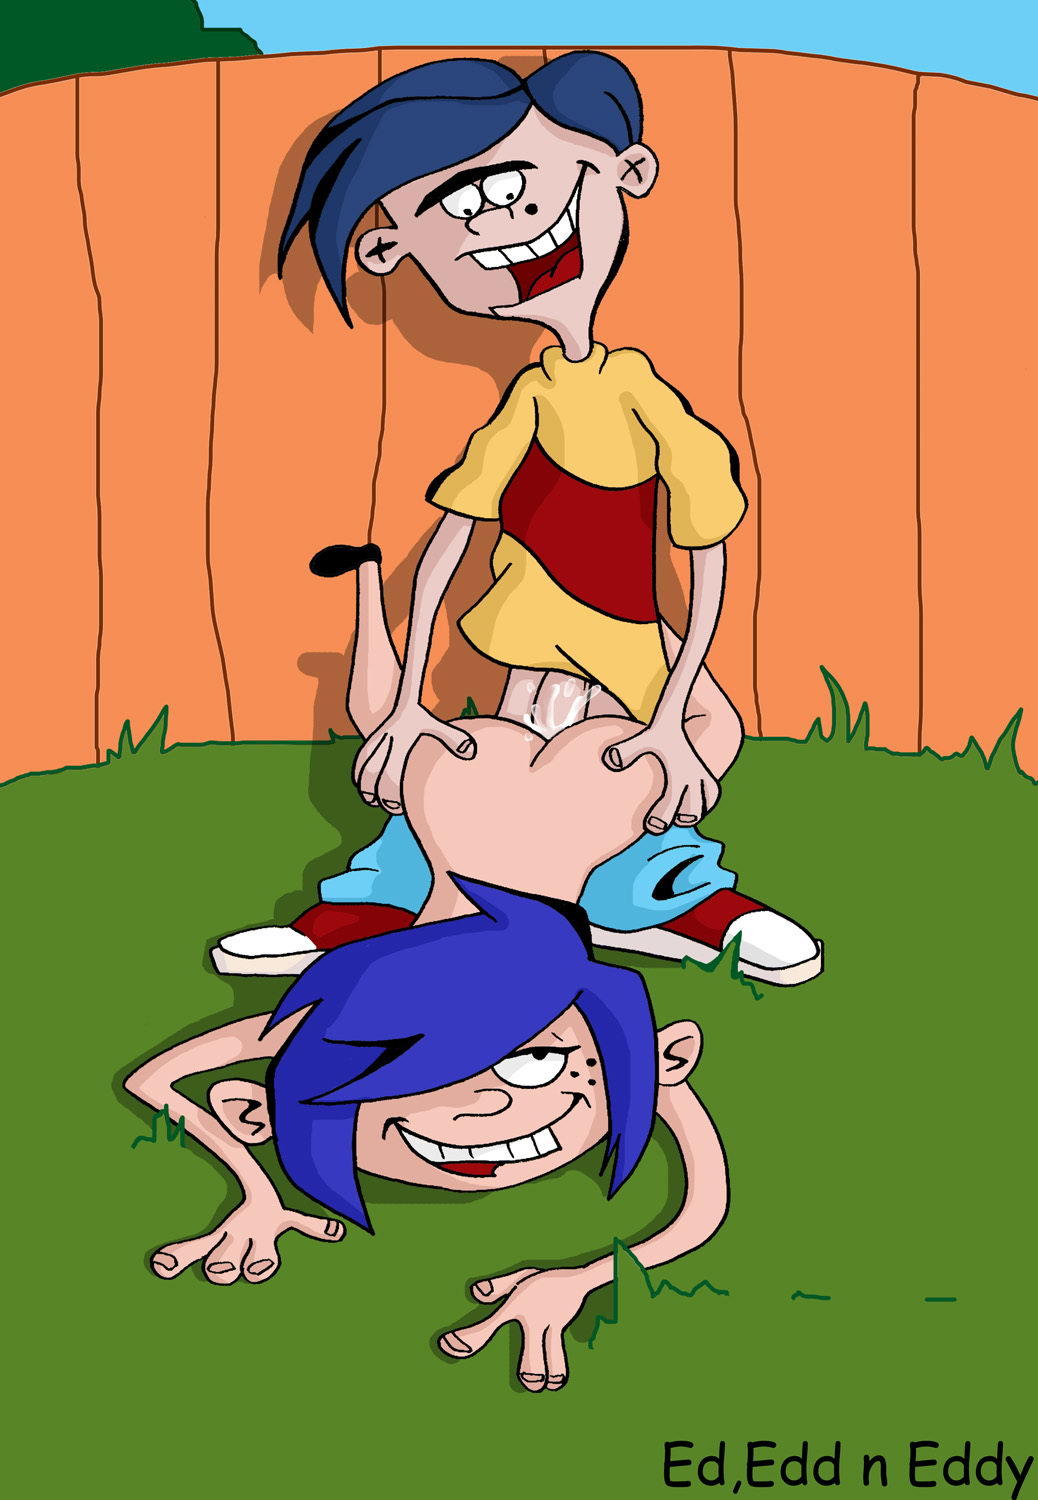 n edd nazz eddy ed Living with hipster**** and gamer ****